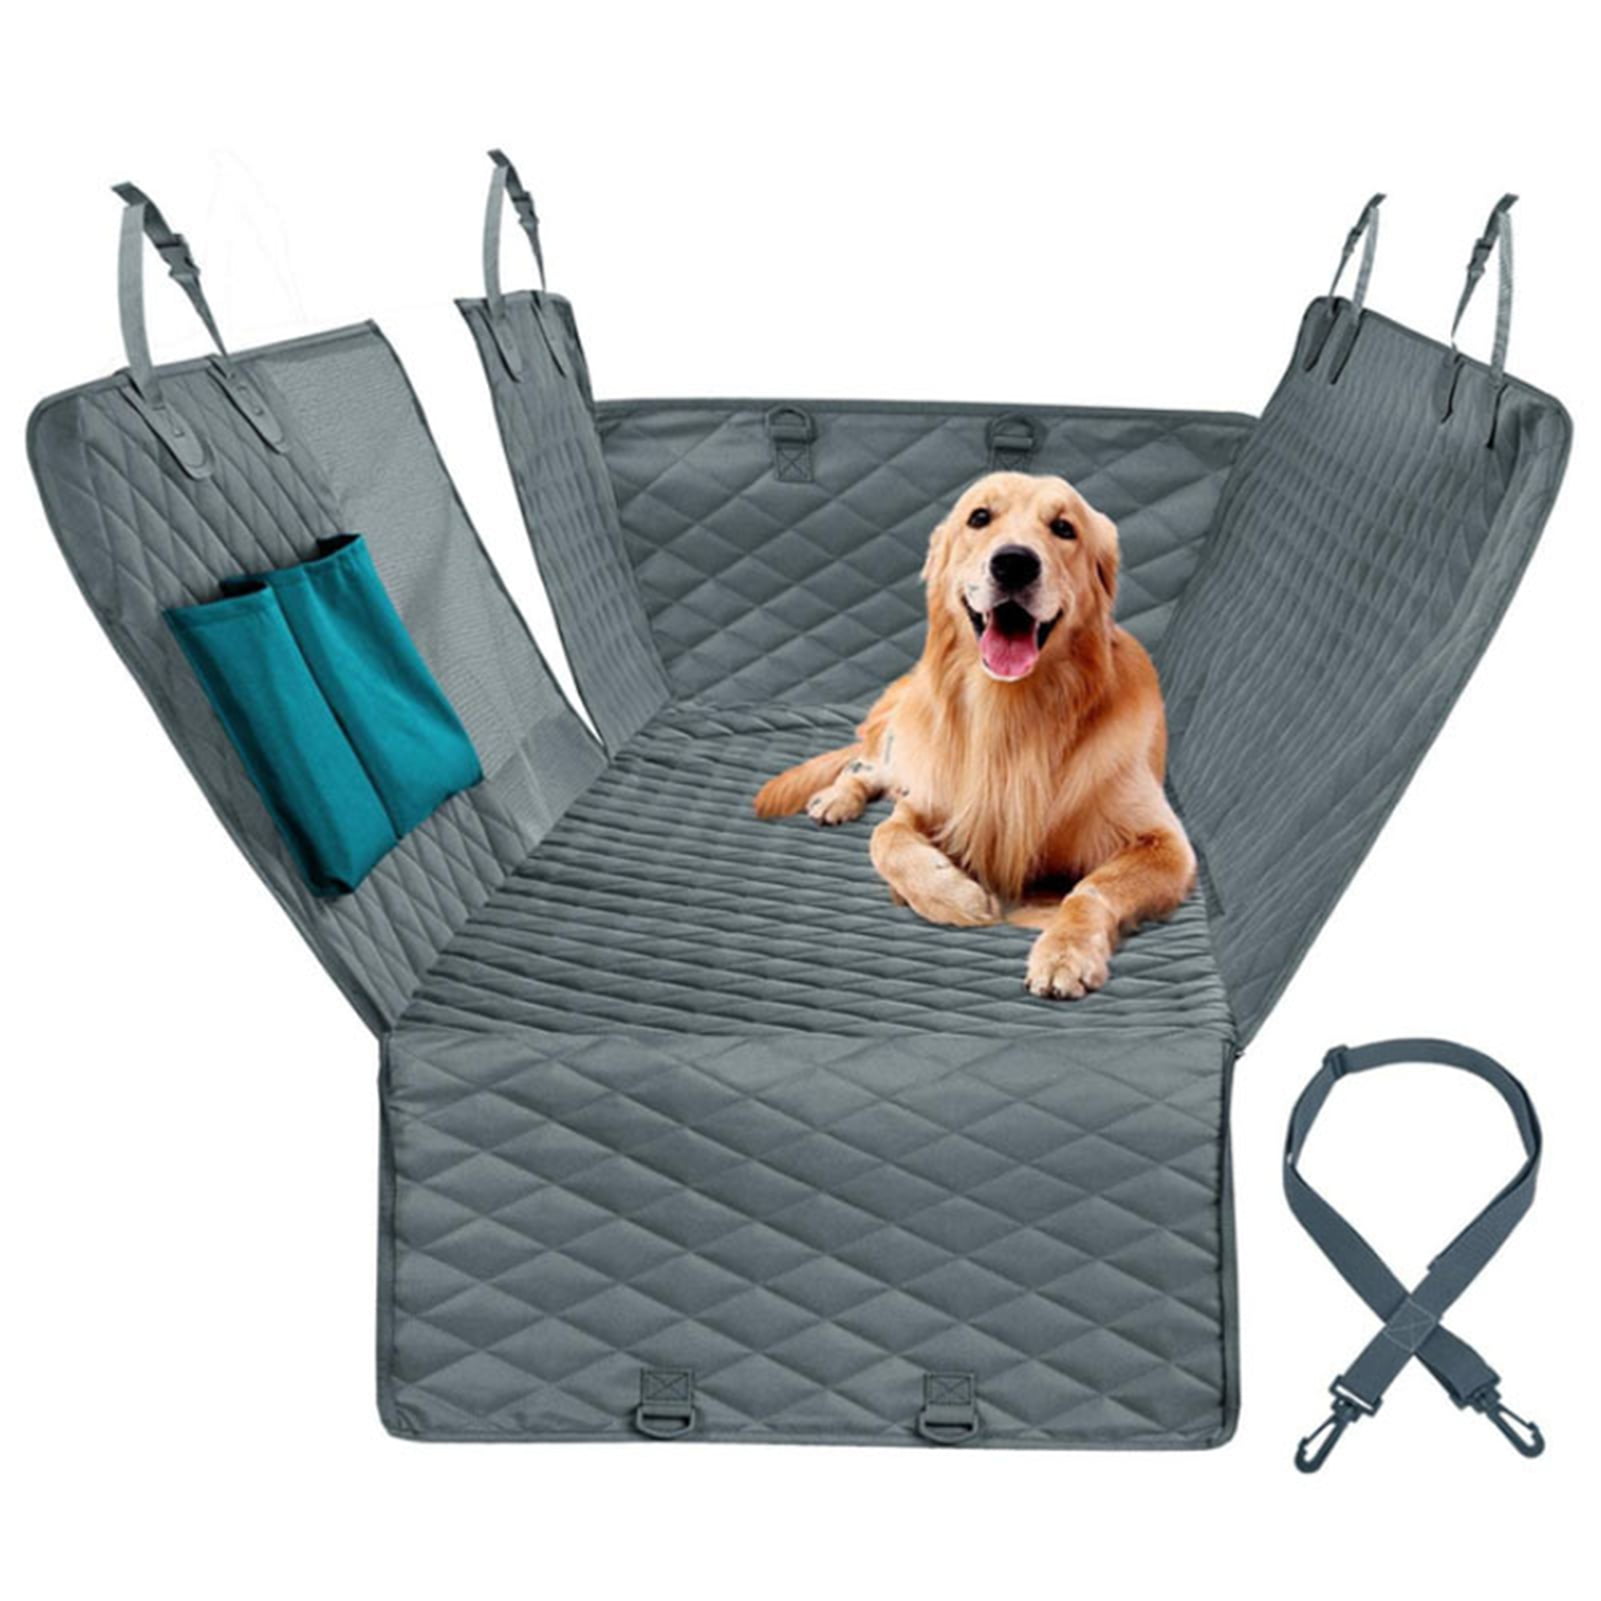 SUPSOO Dog Car Seat Cover Waterproof Durable Anti-Scratch Nonslip Back Seat Pet Protection Dog Travel Hammock with Mesh Window and Side Flaps for Cars/Trucks/SUV 